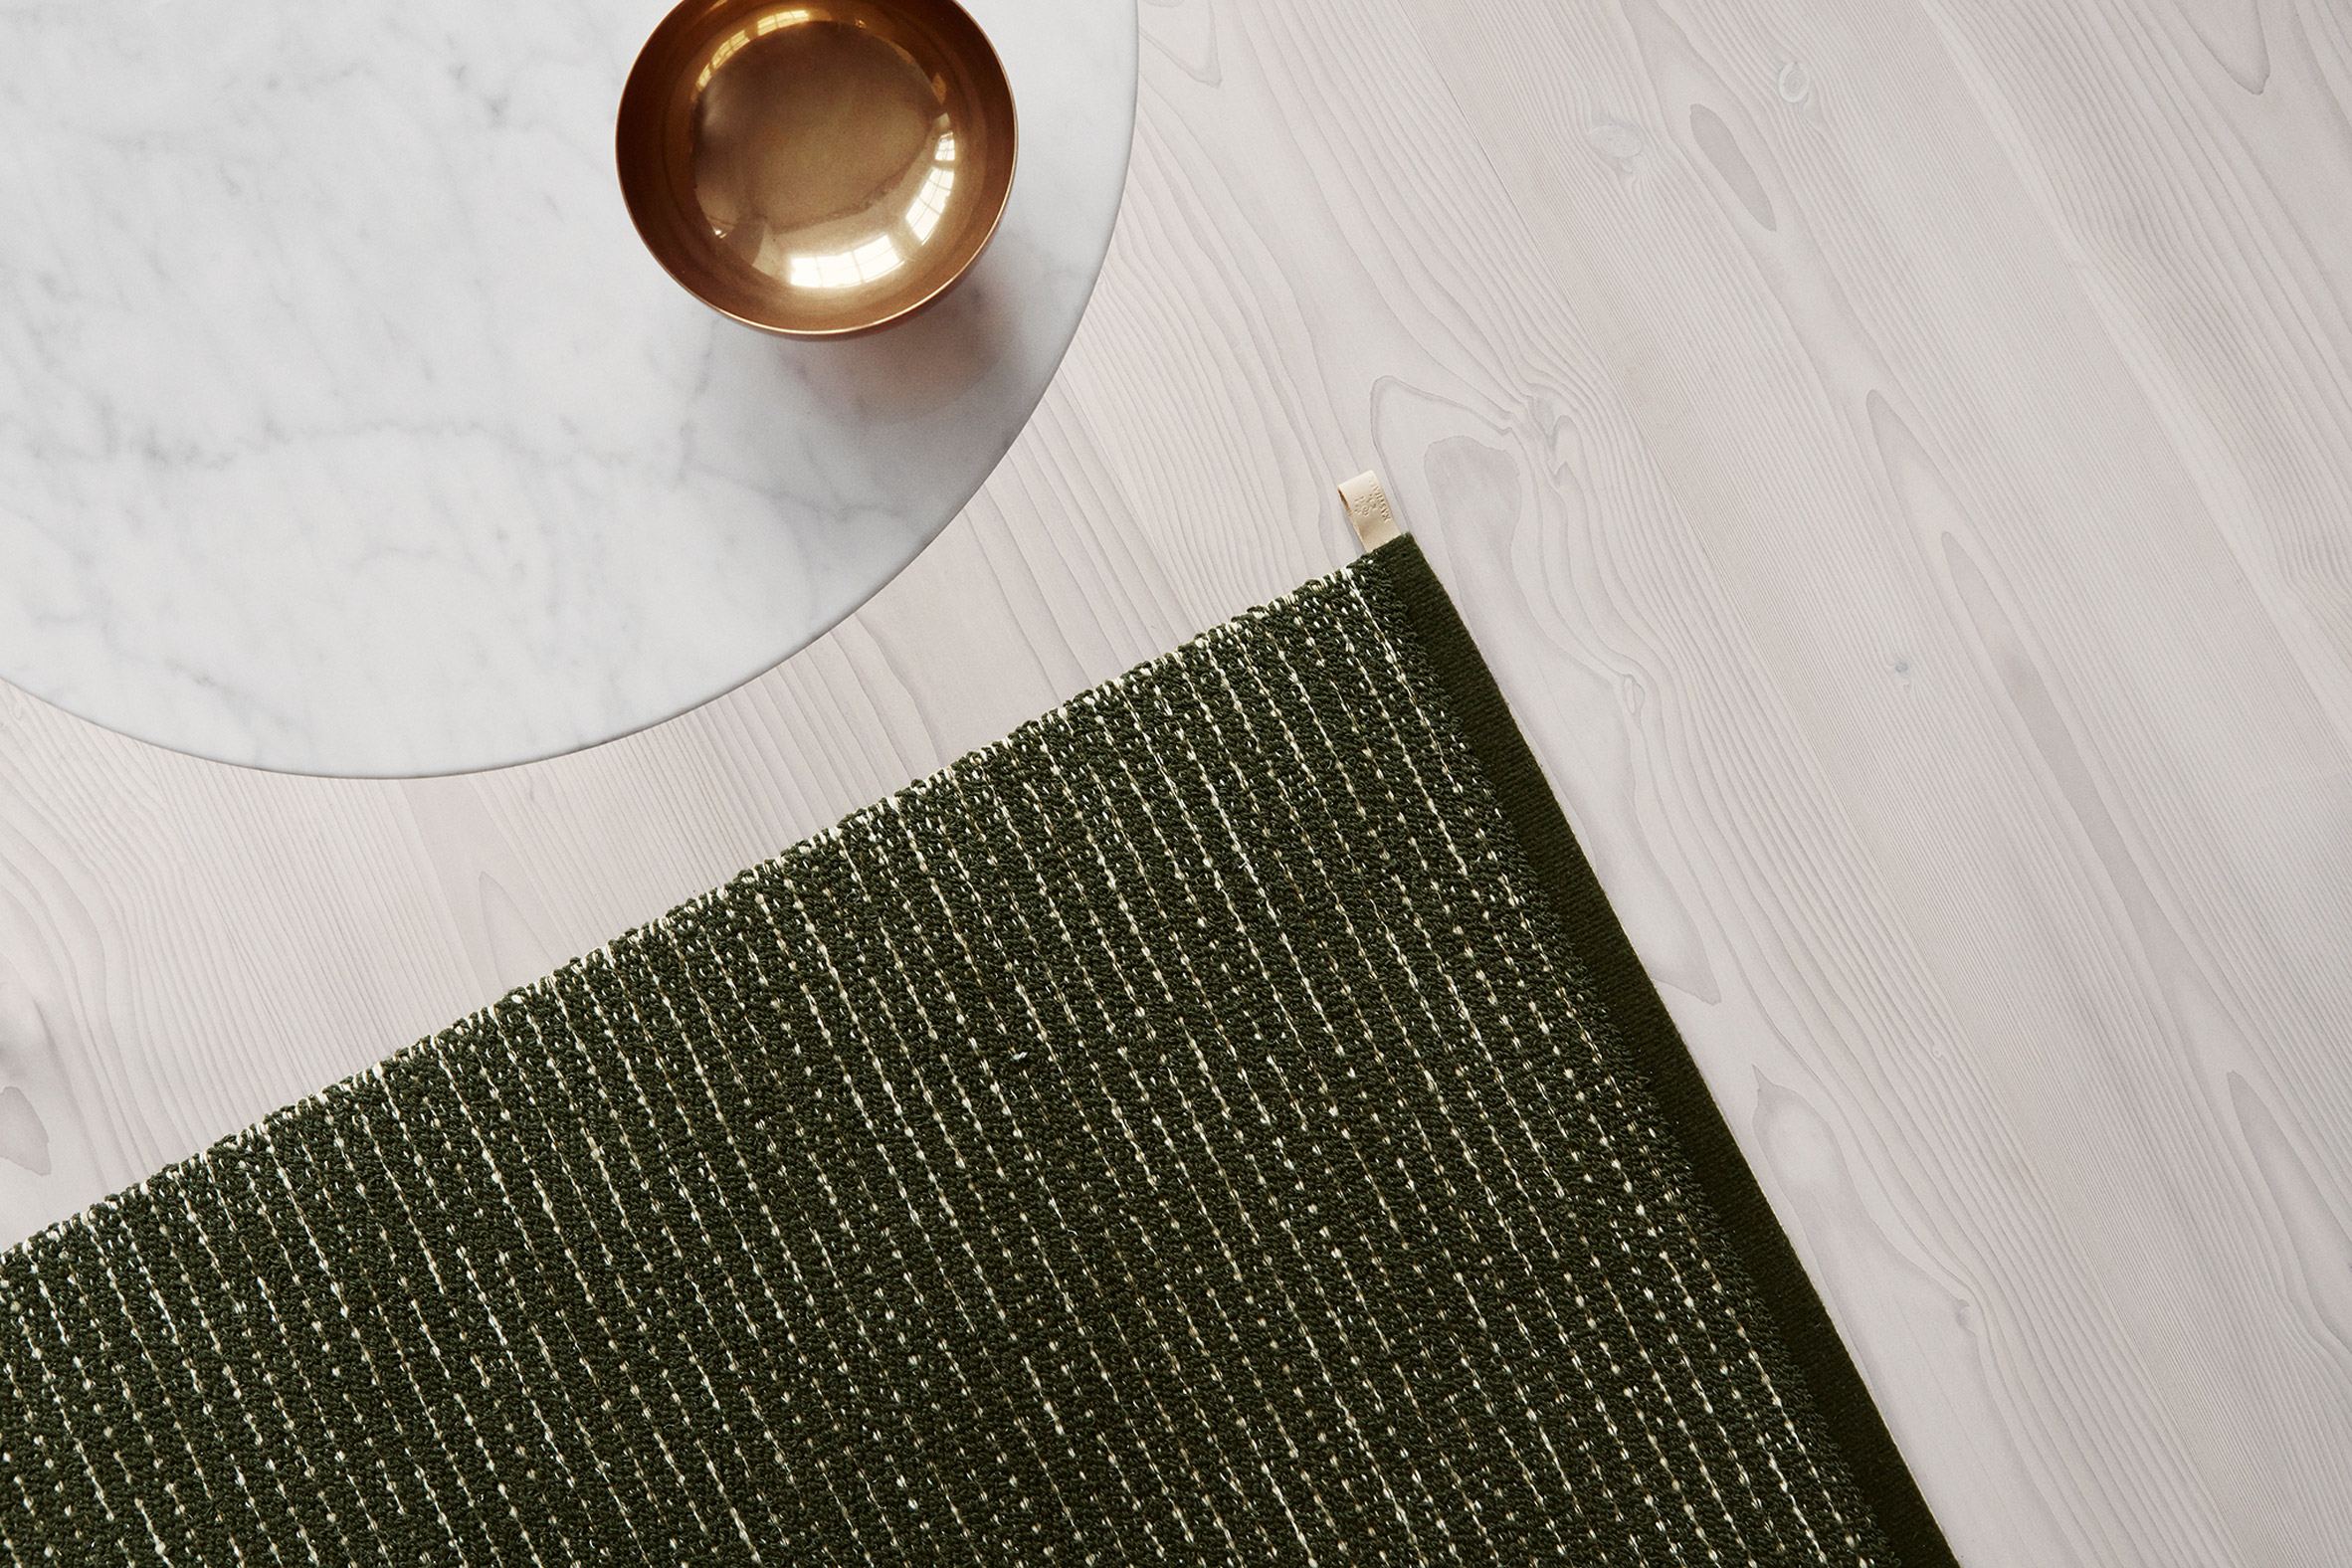 British designer Ilse Crawford was inspired by the natural landscape surrounding the Kasthall factory in Kinna, Västergötland when creating her collection of green rugs for the Swedish textile company.